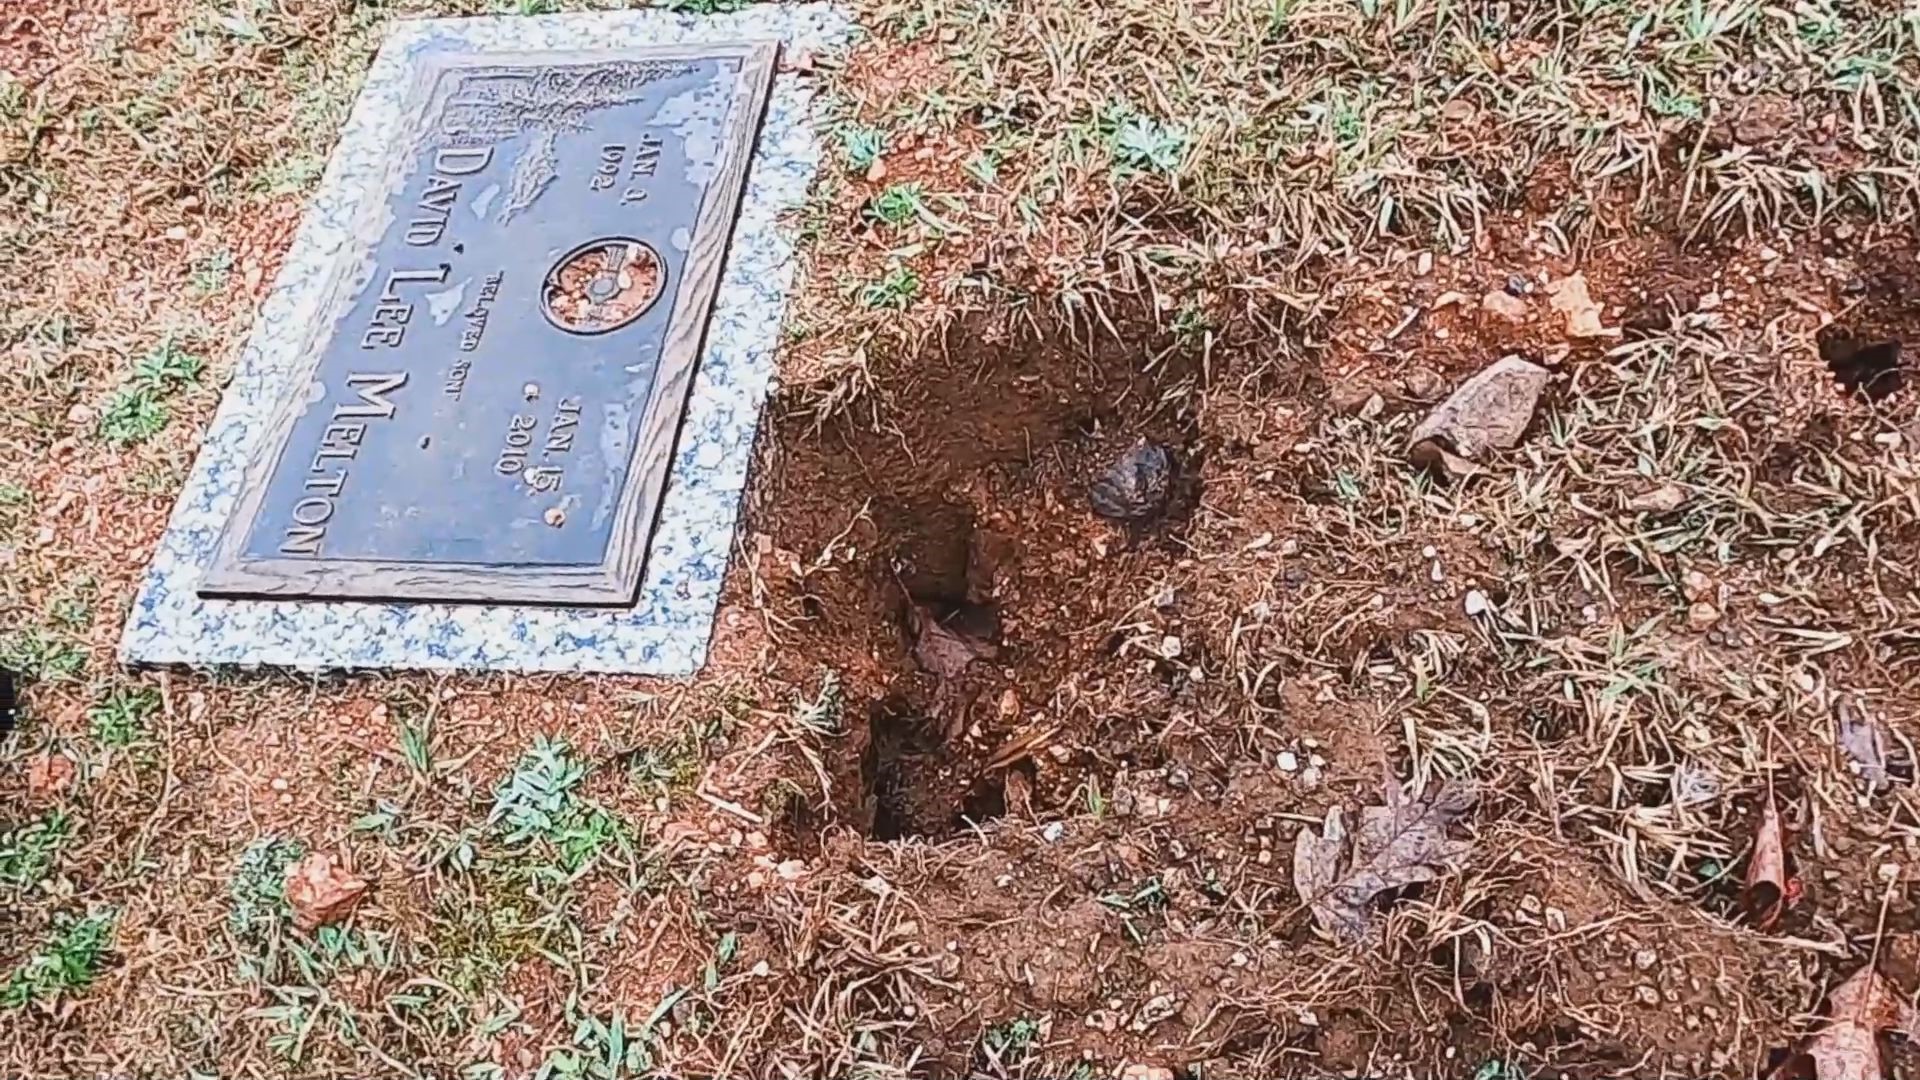 Georgia's Secretary of State has opened an investigation into complaints against Stonemor, a national company with multiple cemeteries in Georgia.